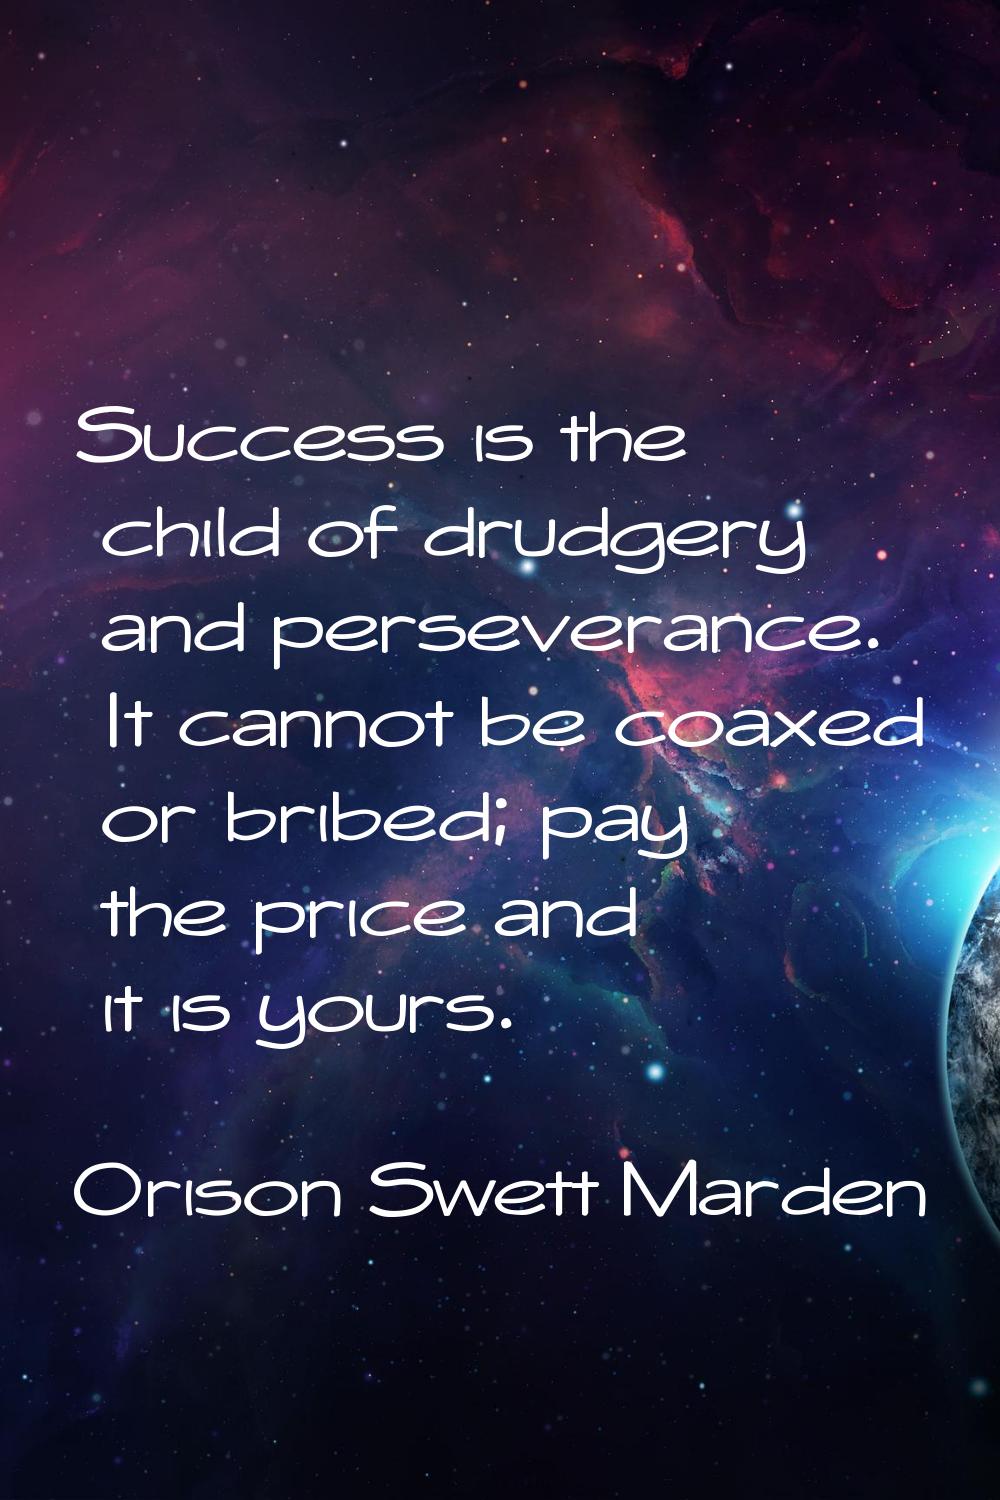 Success is the child of drudgery and perseverance. It cannot be coaxed or bribed; pay the price and